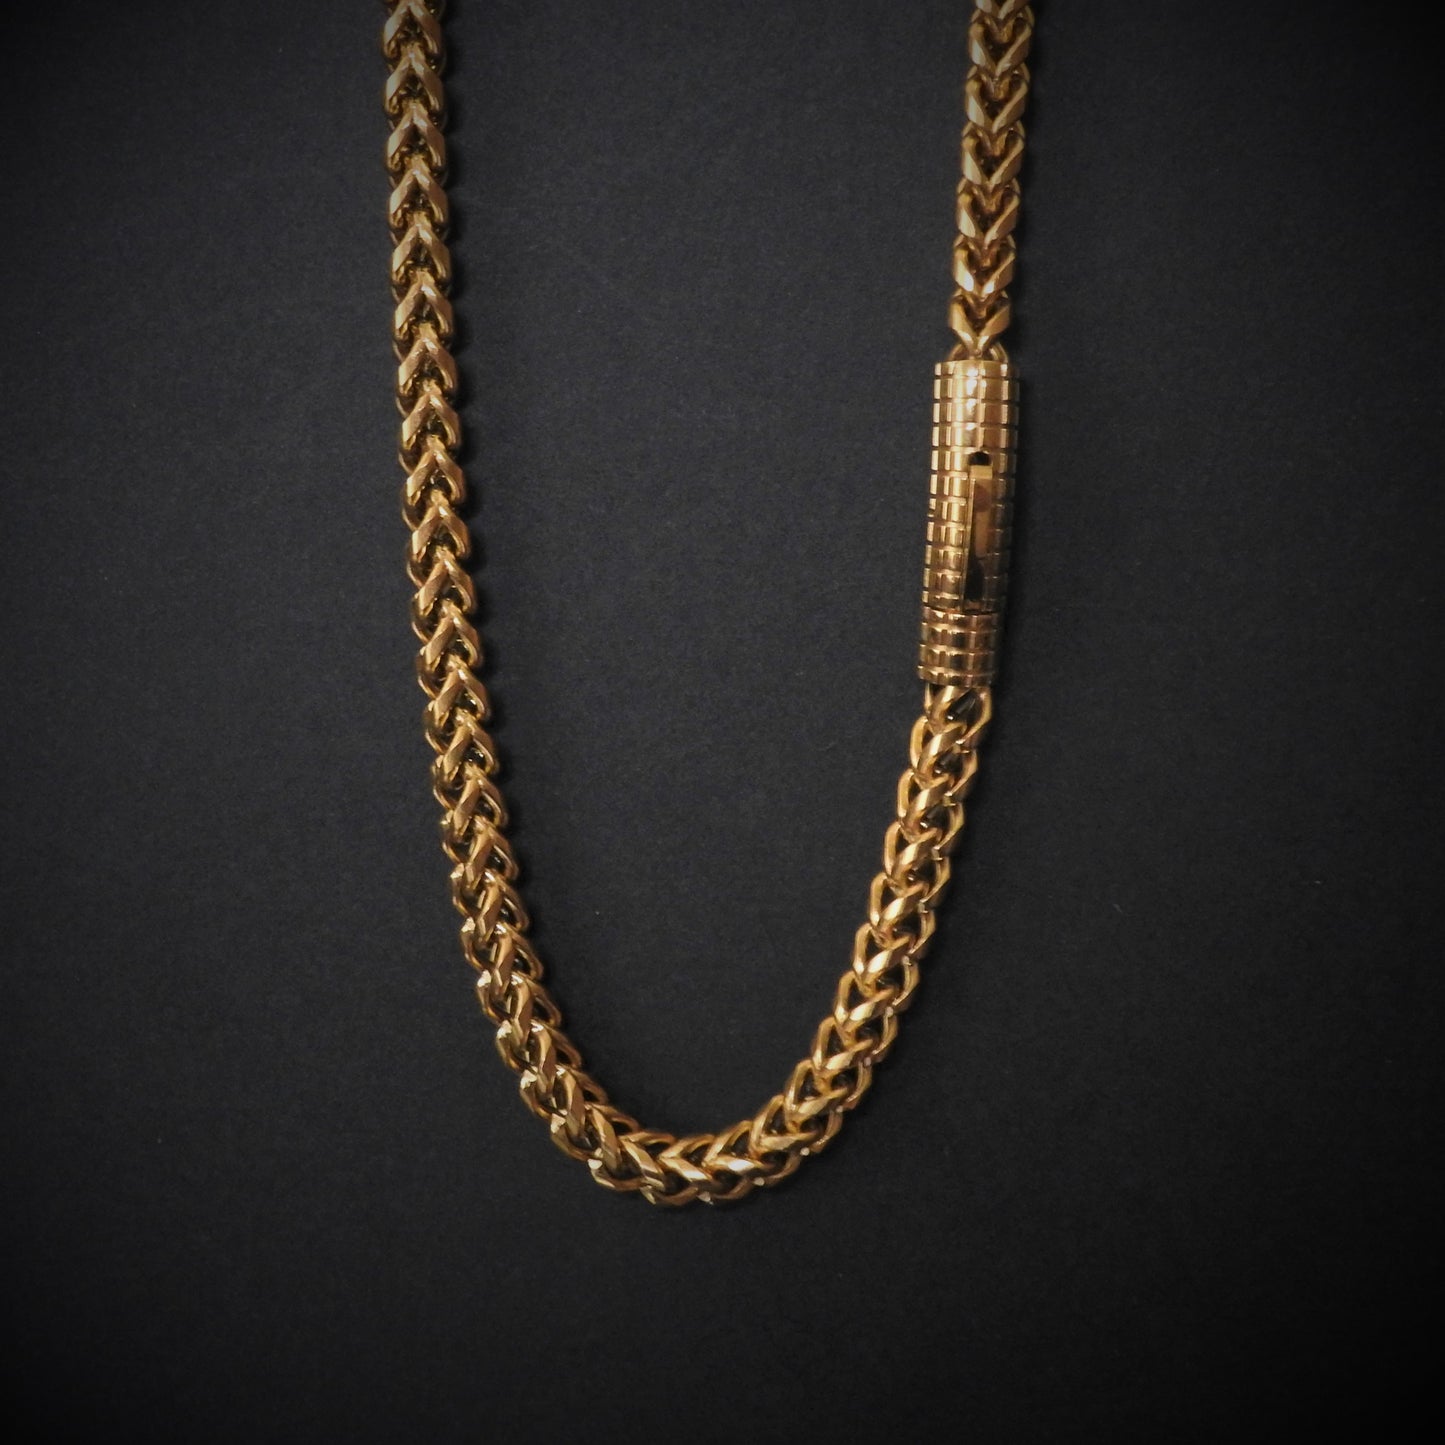 Franco chain 14mm - Gold Dealers